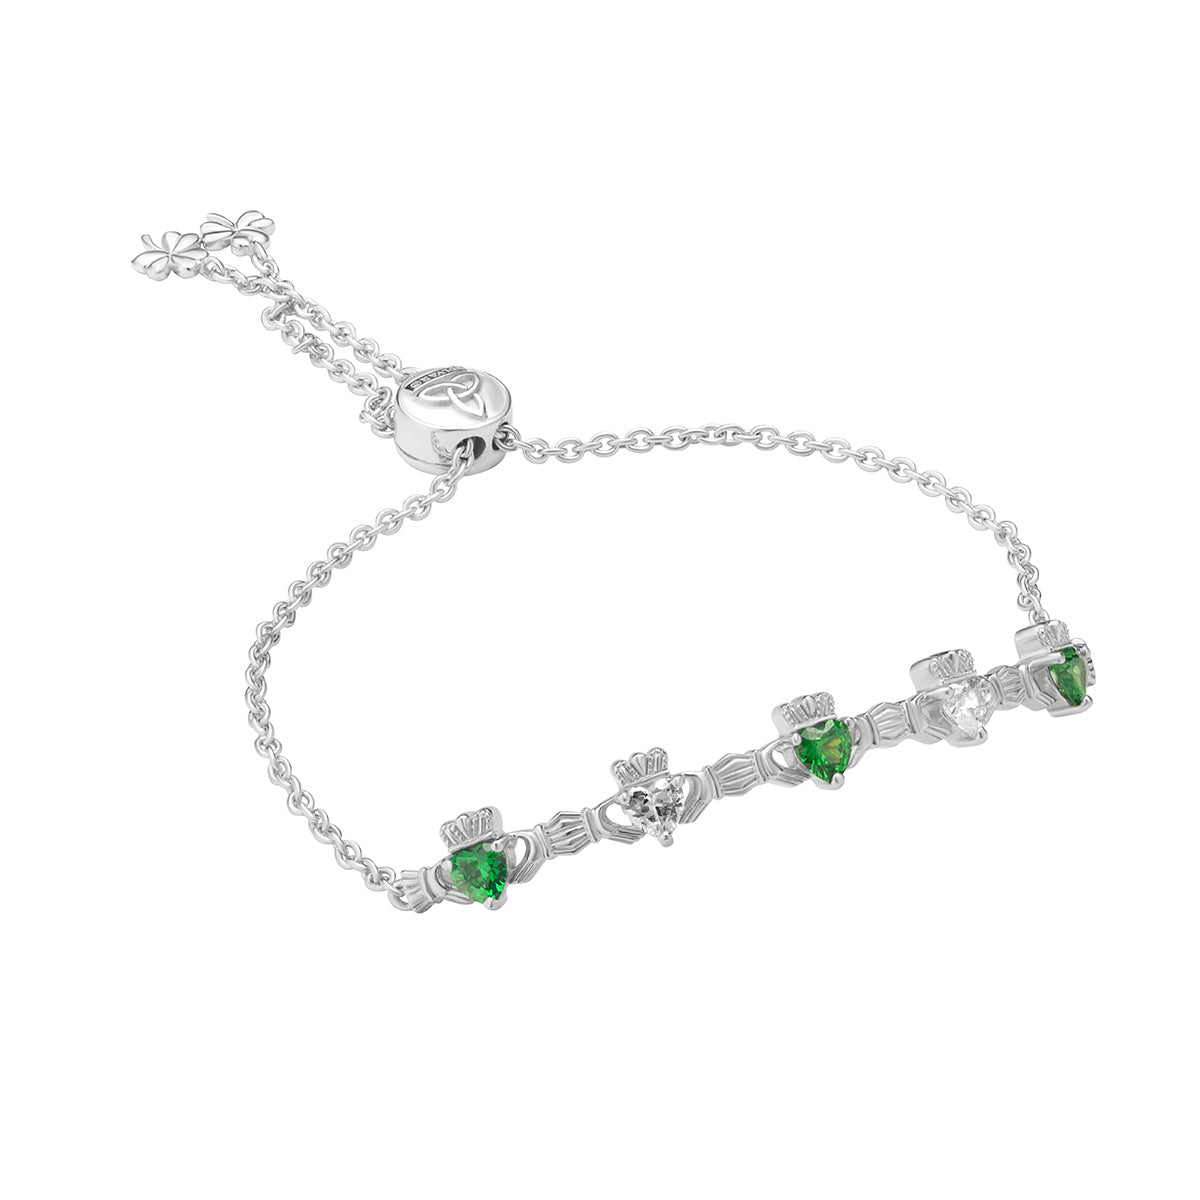 sterling silver claddagh draw string bracelet S50149 with white and green crystal glass stones at five claddagh symbols from Solvar